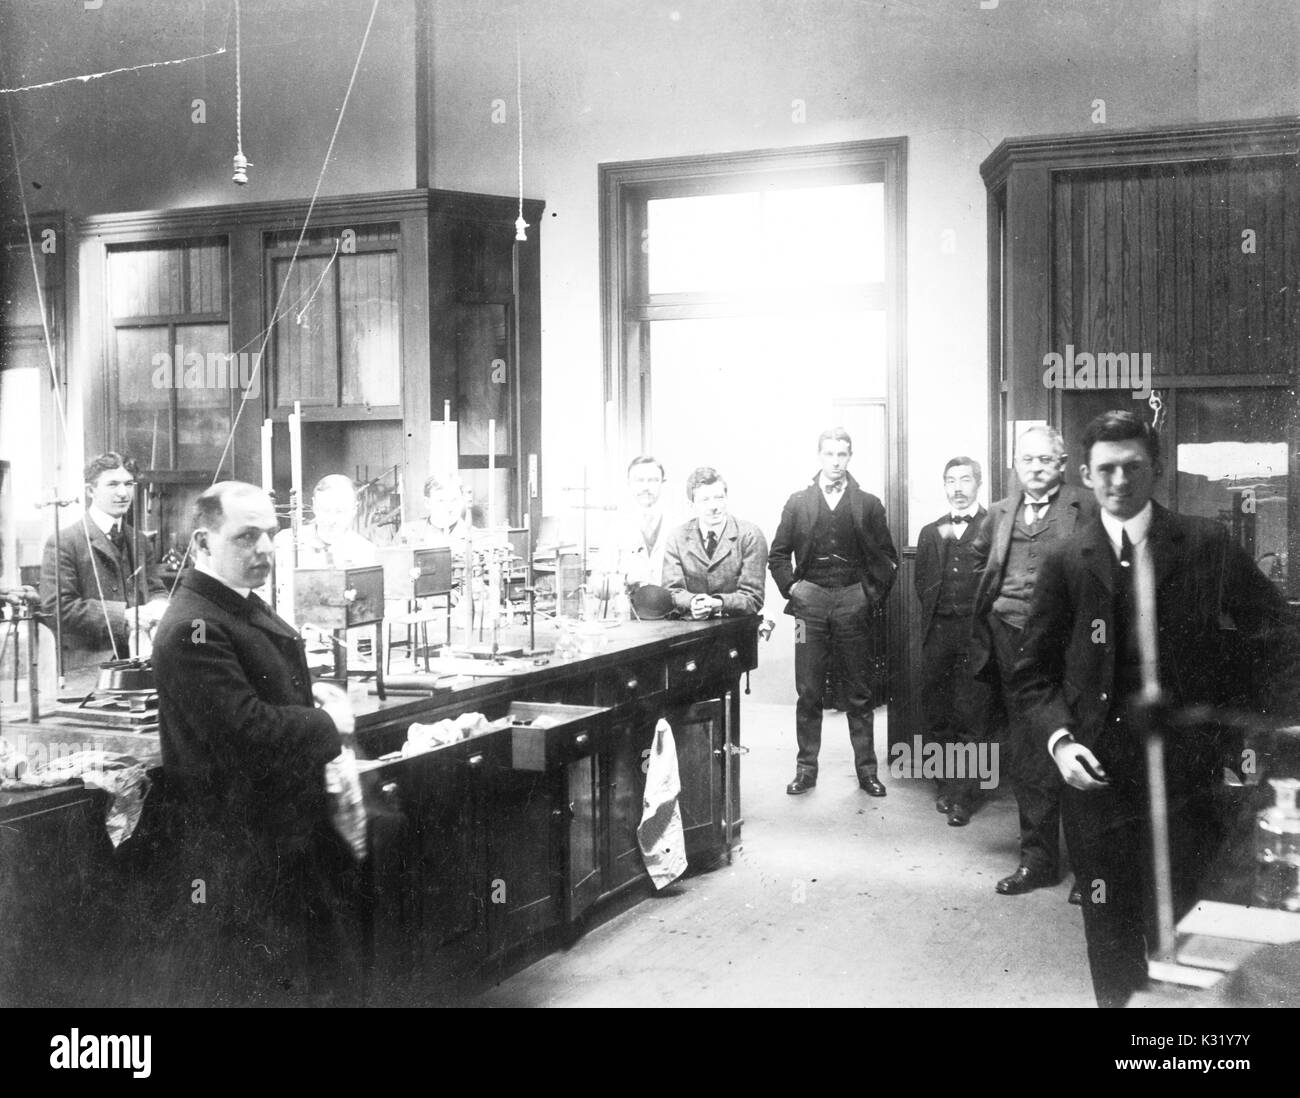 Photograph of the interior of the Harmon N Morse Chemical Laboratory at old campus Johns Hopkins University, featuring eight standing chemists from his lab clustered around benches with glassware and equipment, wearing suits, including Harmon Northrup Morse, Ira Obed Schaub, Benjamin Franklin Carver, John P Coony, Paul Edward Schaun, Howard Waters Doughty, Stanley DeVries Shipley, Rene de Mortemer Taveau, Isabura Wada, and John Hendricken King, Baltimore, Maryland, 1902. Stock Photo